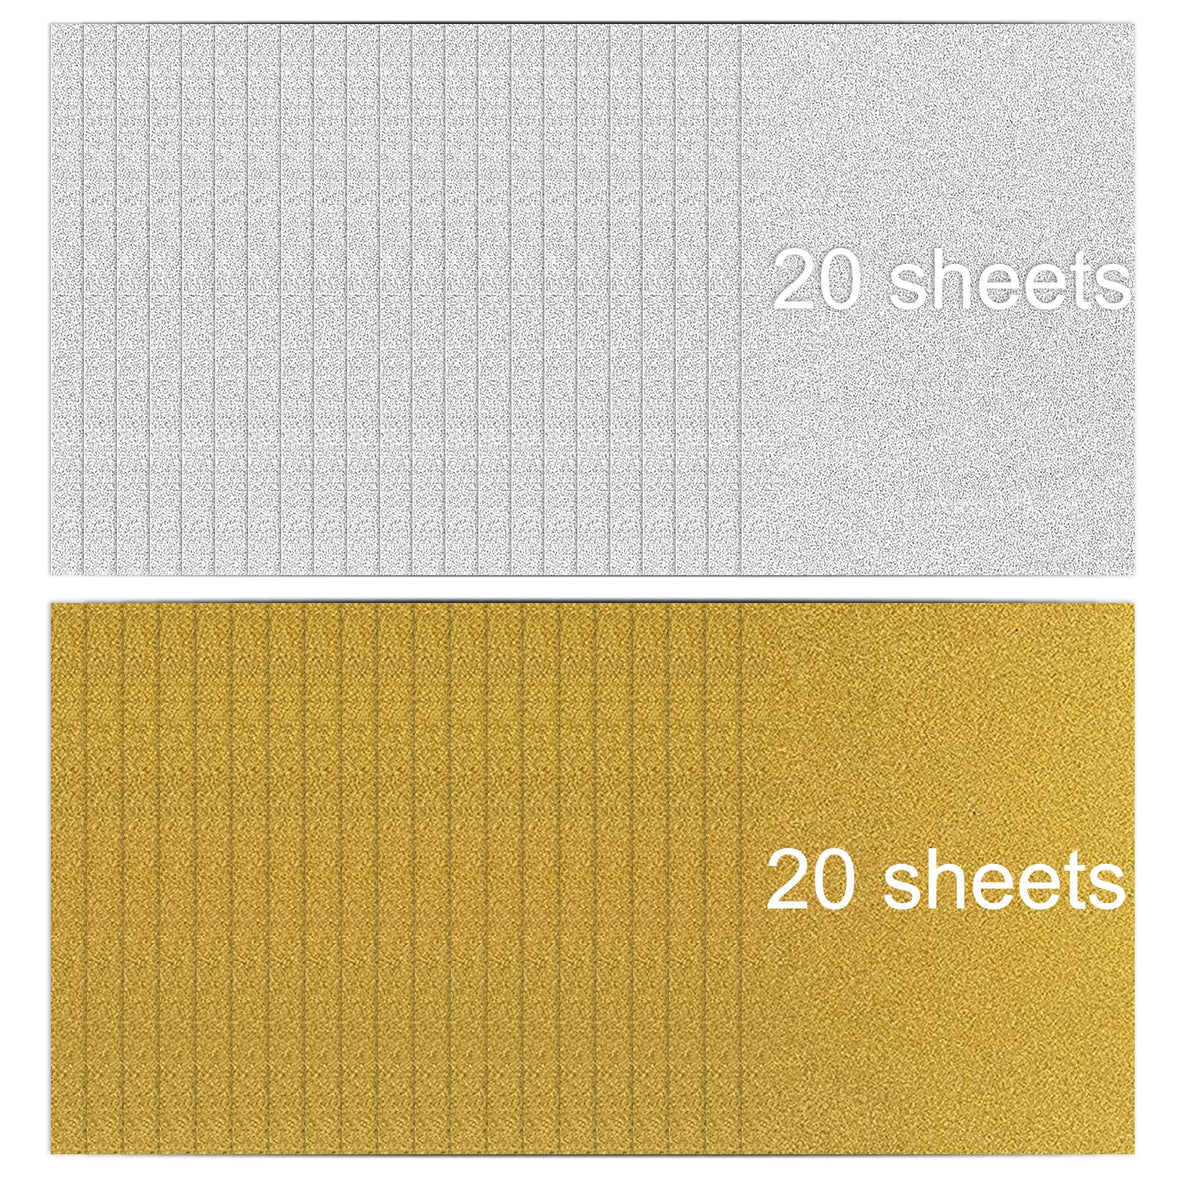 40 Sheets Gold Silver Glitter Cardstock Paper A4 Self Adhesive Glitter Paper 250 GSM for Crafts